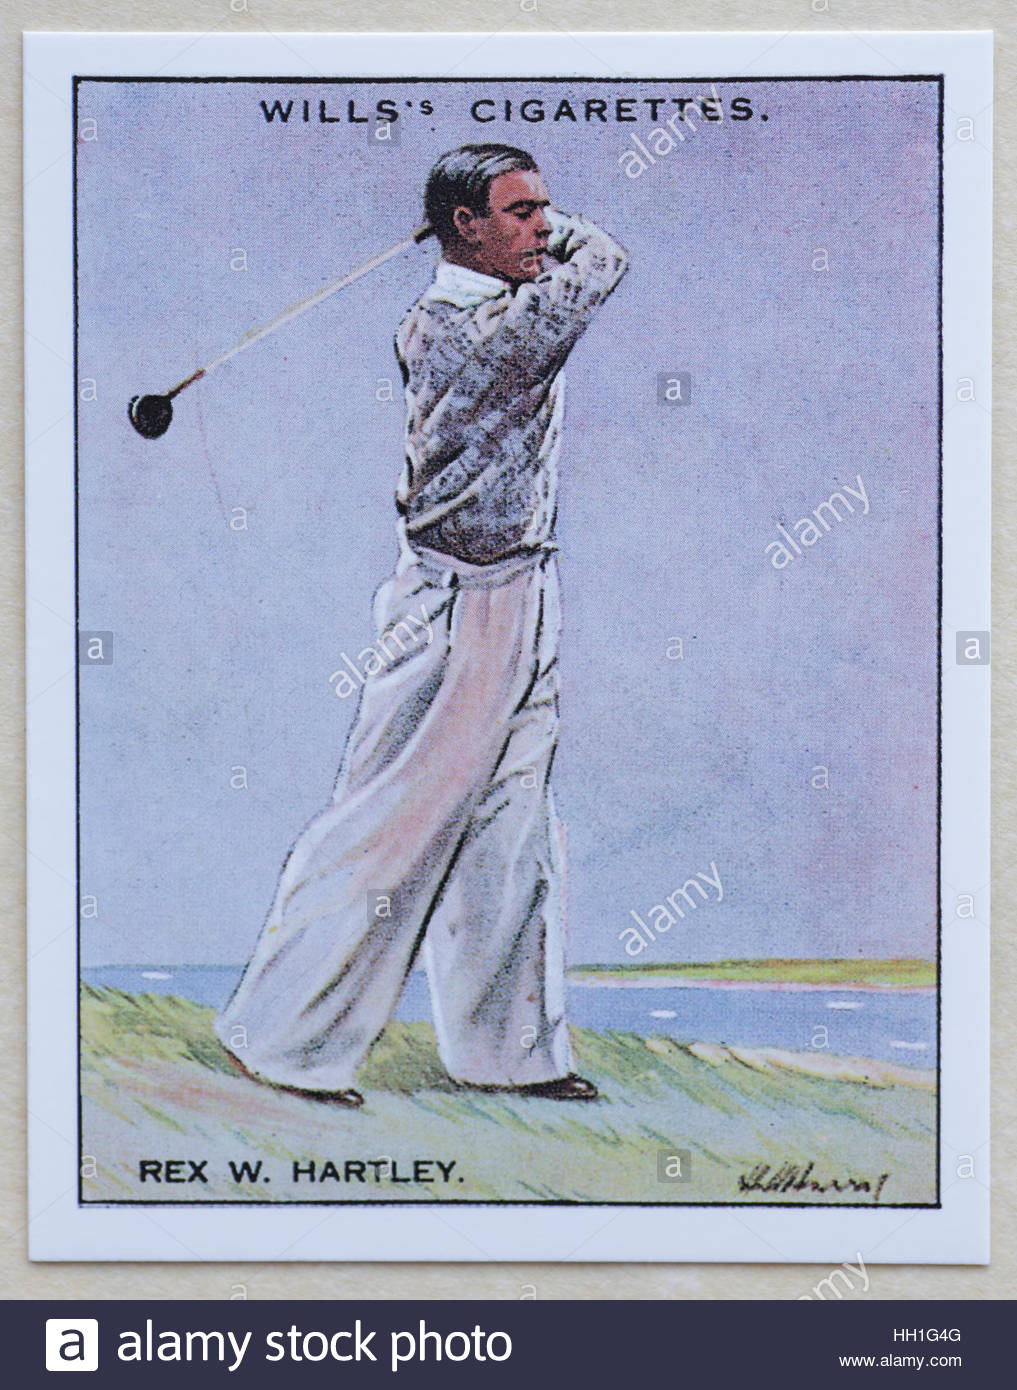 Rex W. Hartley - Famous Golfers, cigarette cards issued in 1930 by W.D.& H.O. Wills cigarettes. Stock Photo